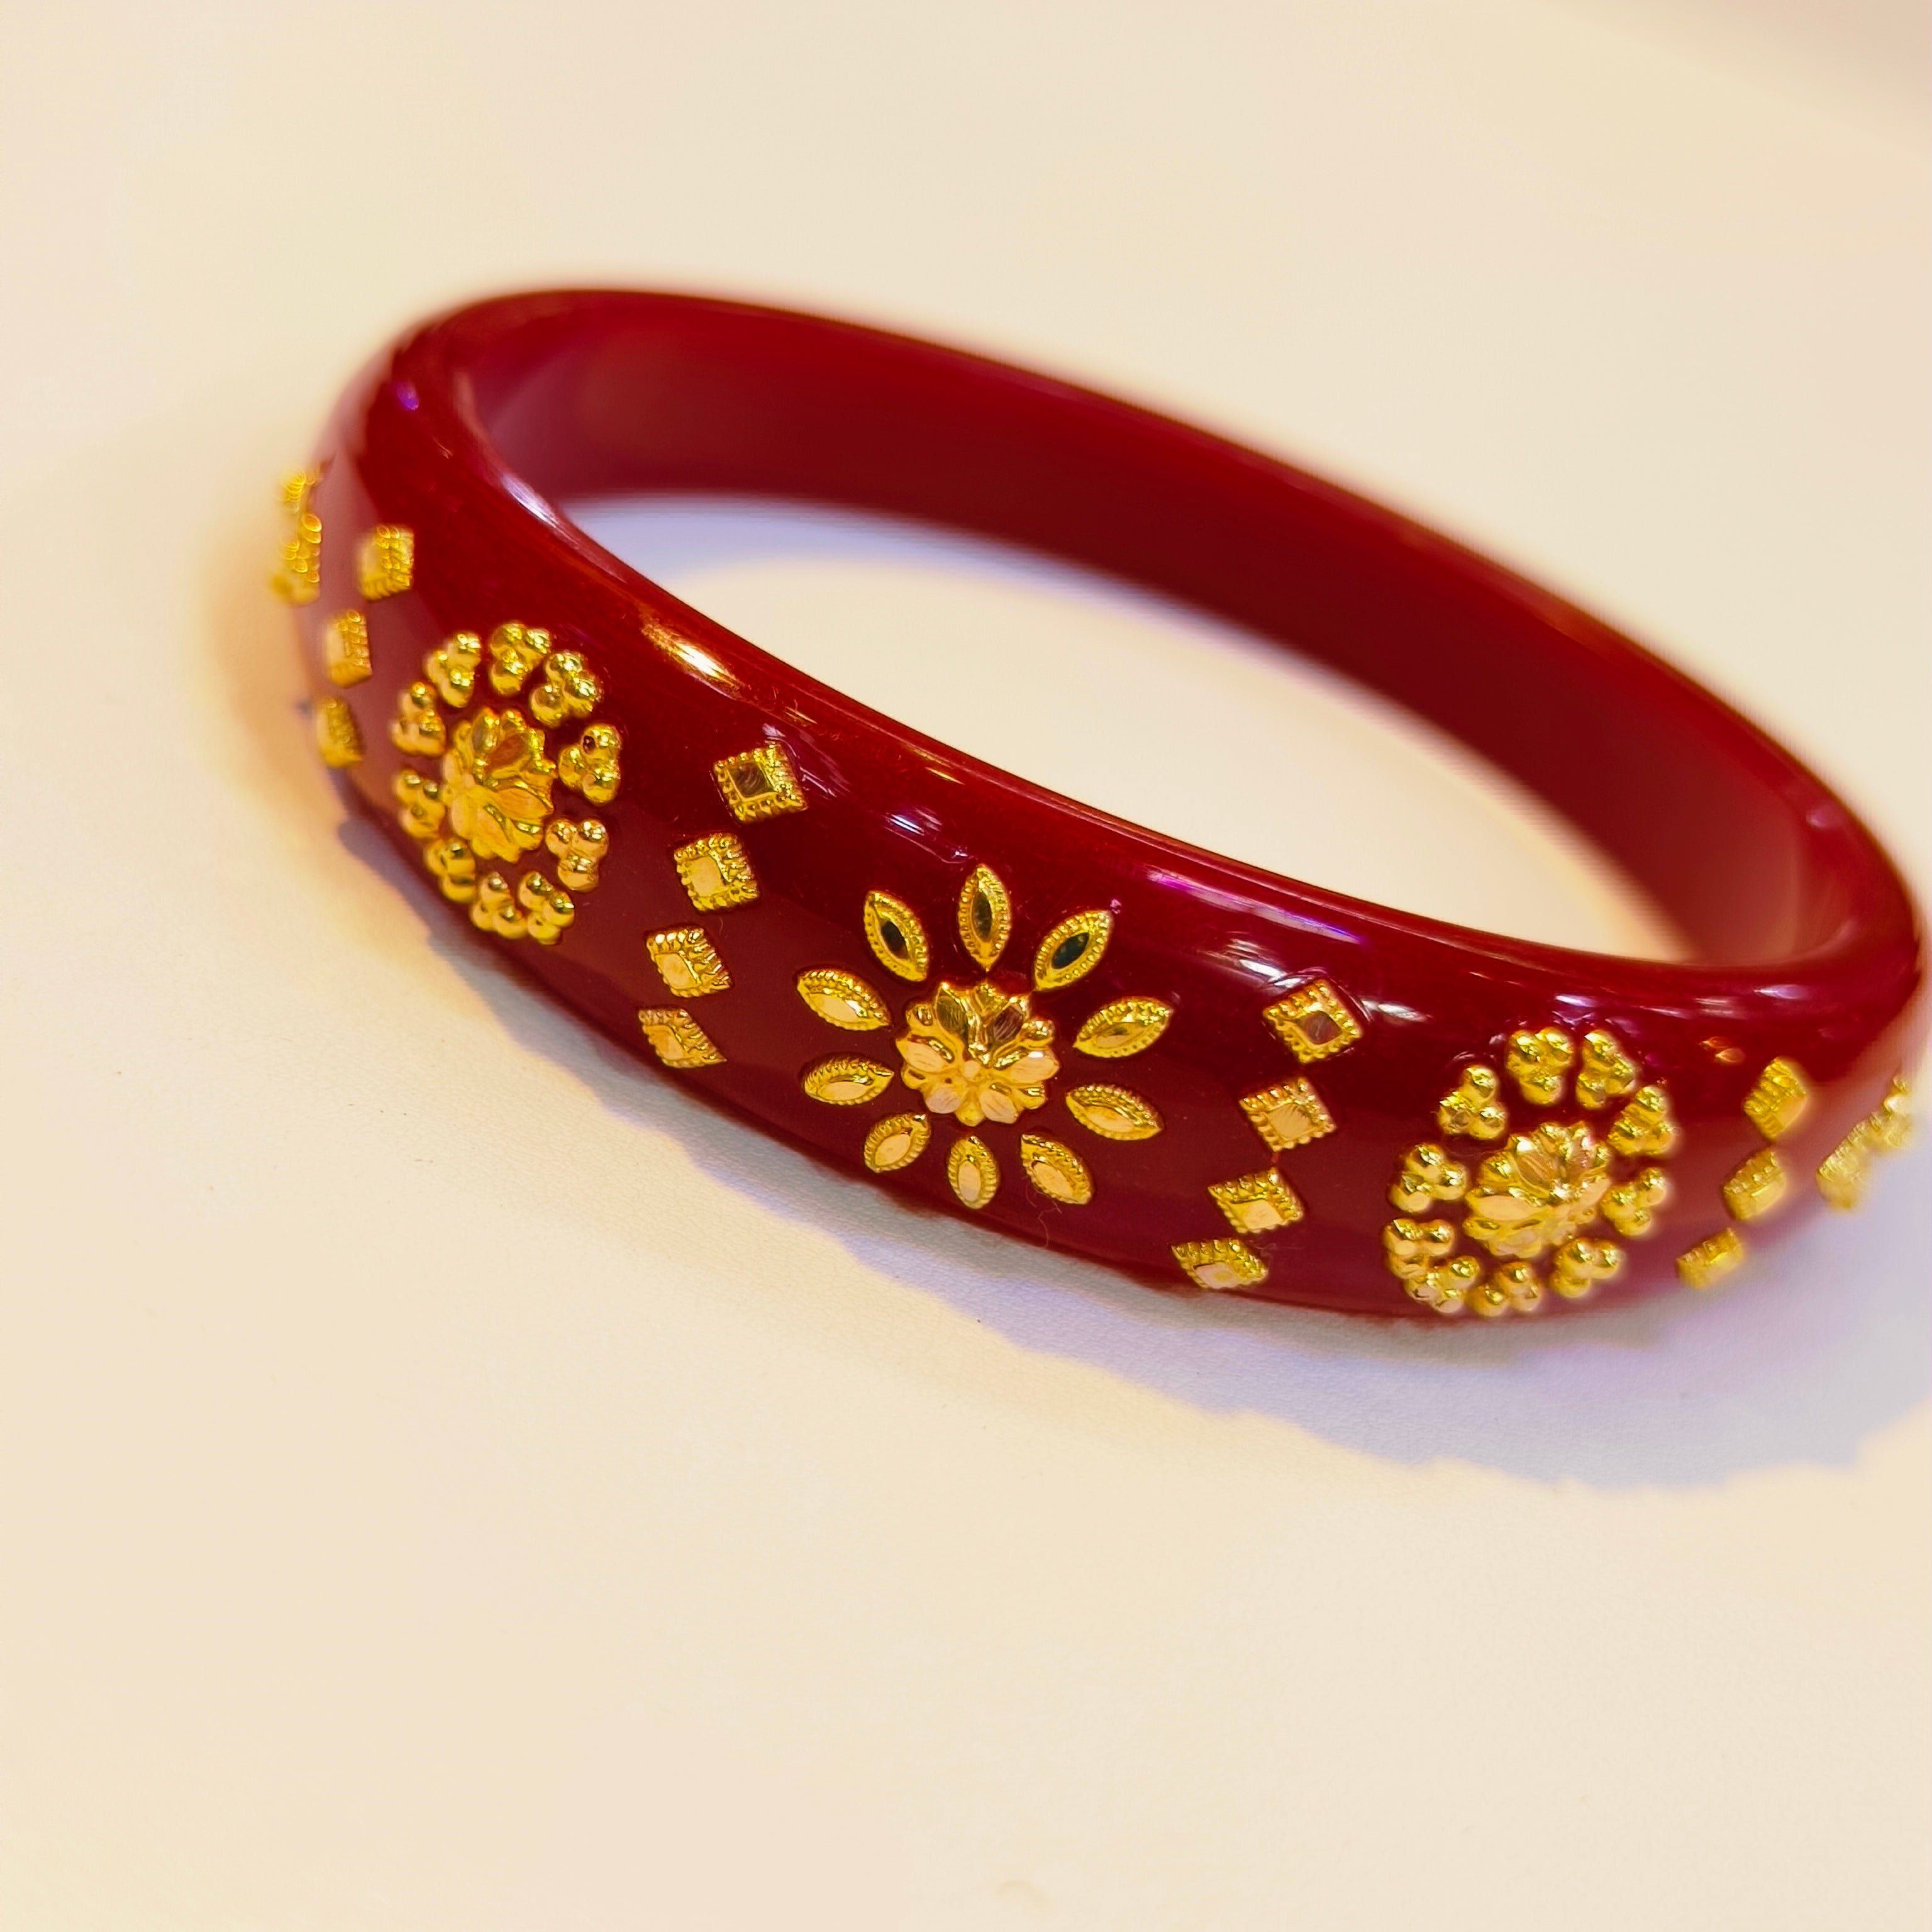 Buy Plastic Gold Plated Shakha Pola Bangle Set for Women (Mukh Flower Red &  786 Fish White) (2-4) at Amazon.in